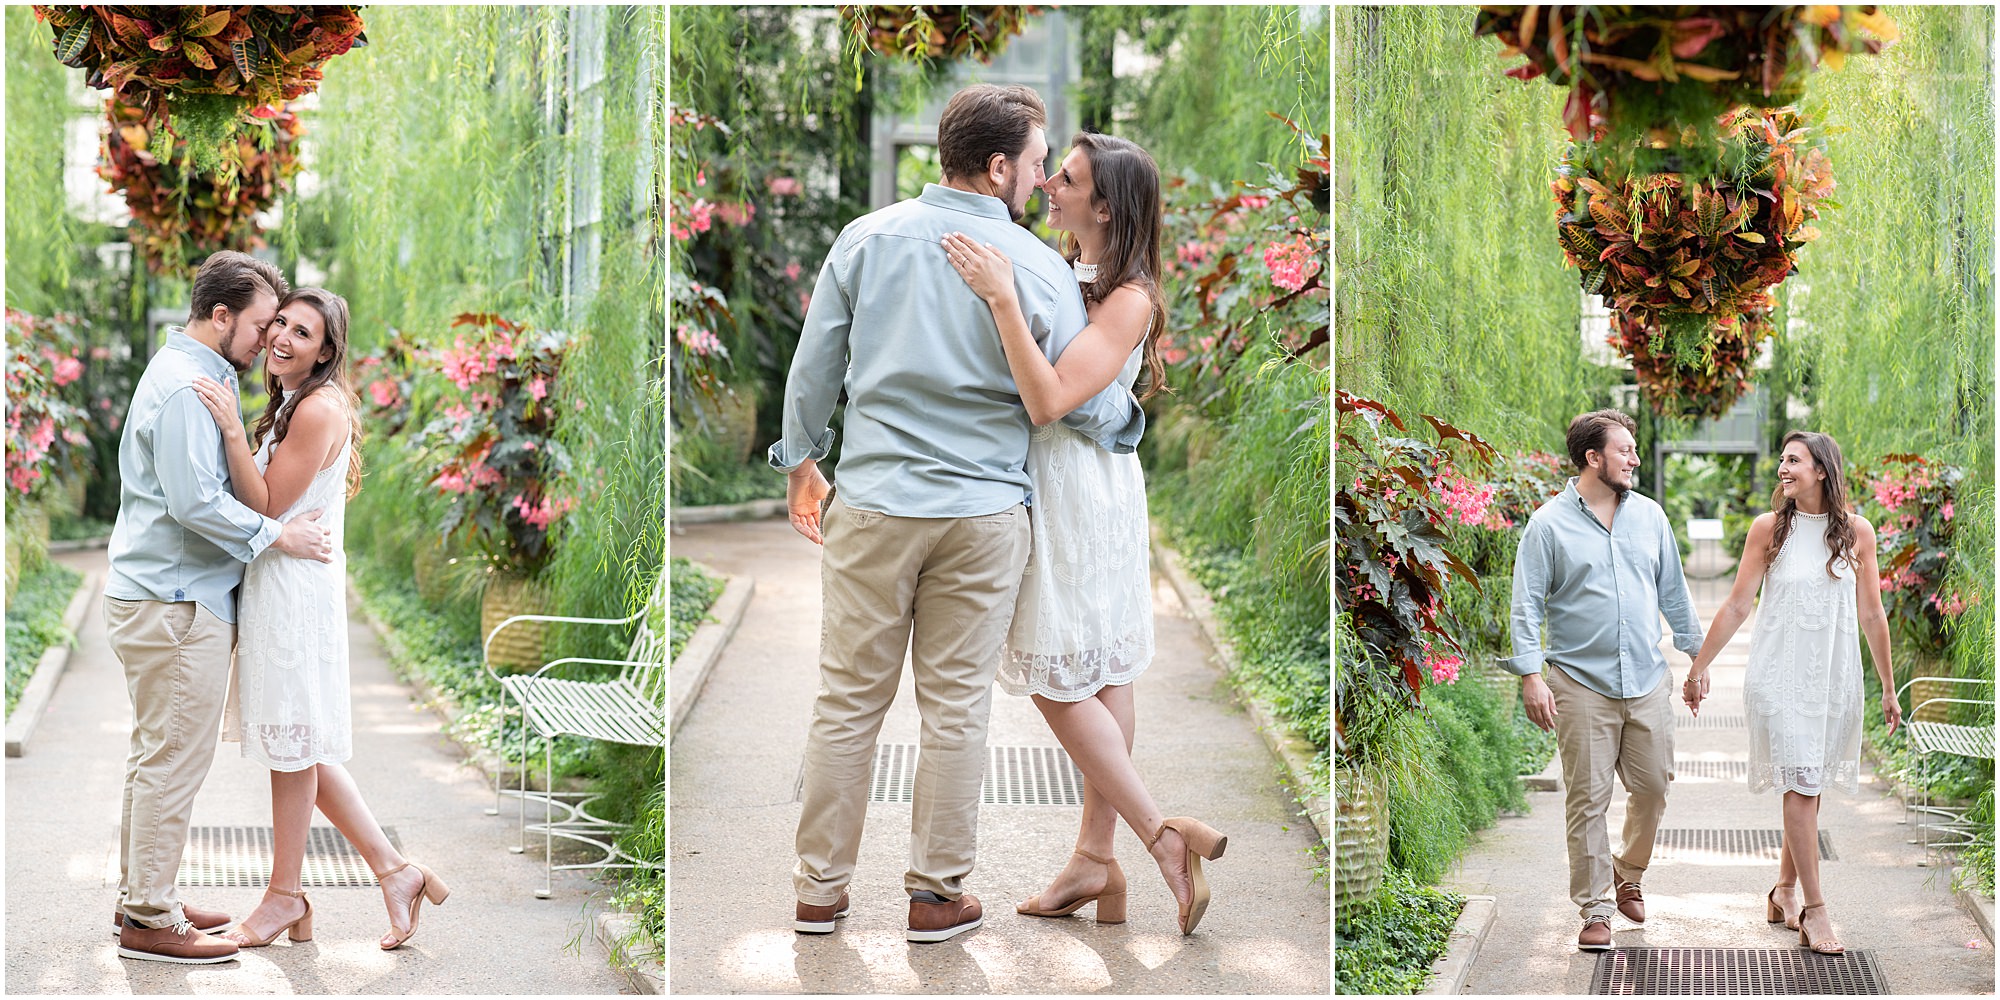 A summer Engagement Session at Longwood Gardens in the conservatory 